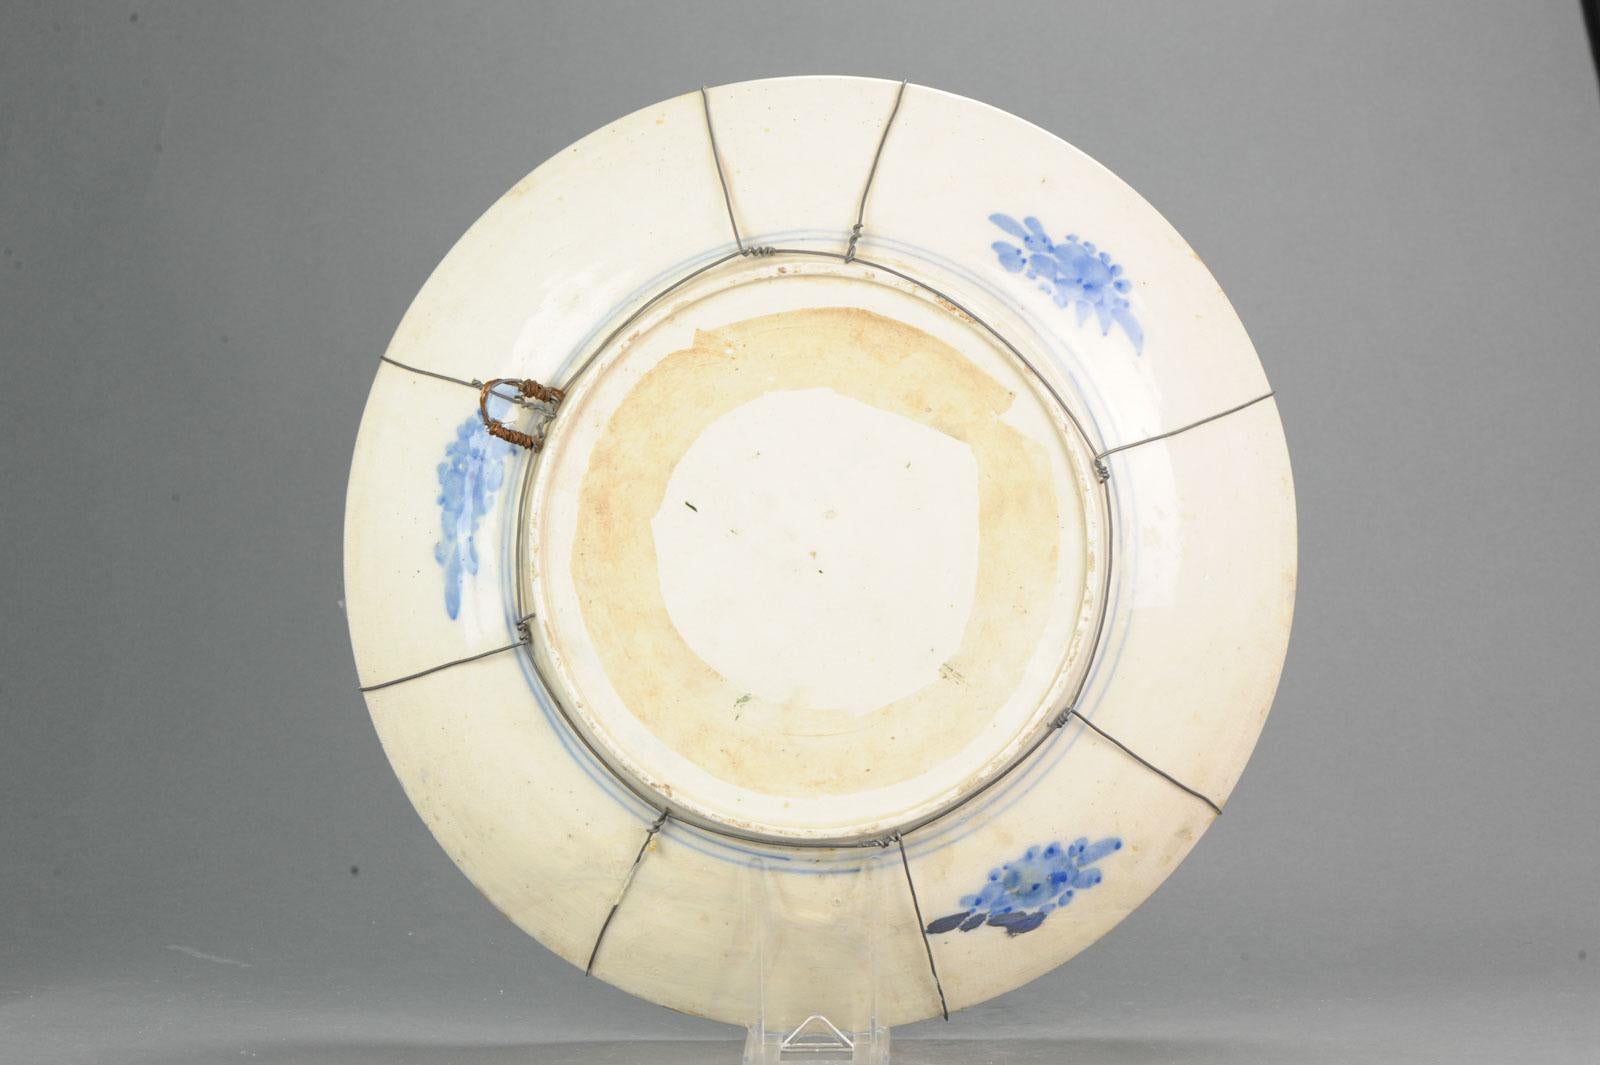 Nice restored piece. This scene is often found on Chinese pieces of the same period.

Fantastic piece of superb quality and with brightly colored scene of a landscape with also birds and figures. Great piece.

Additional information:
Material: